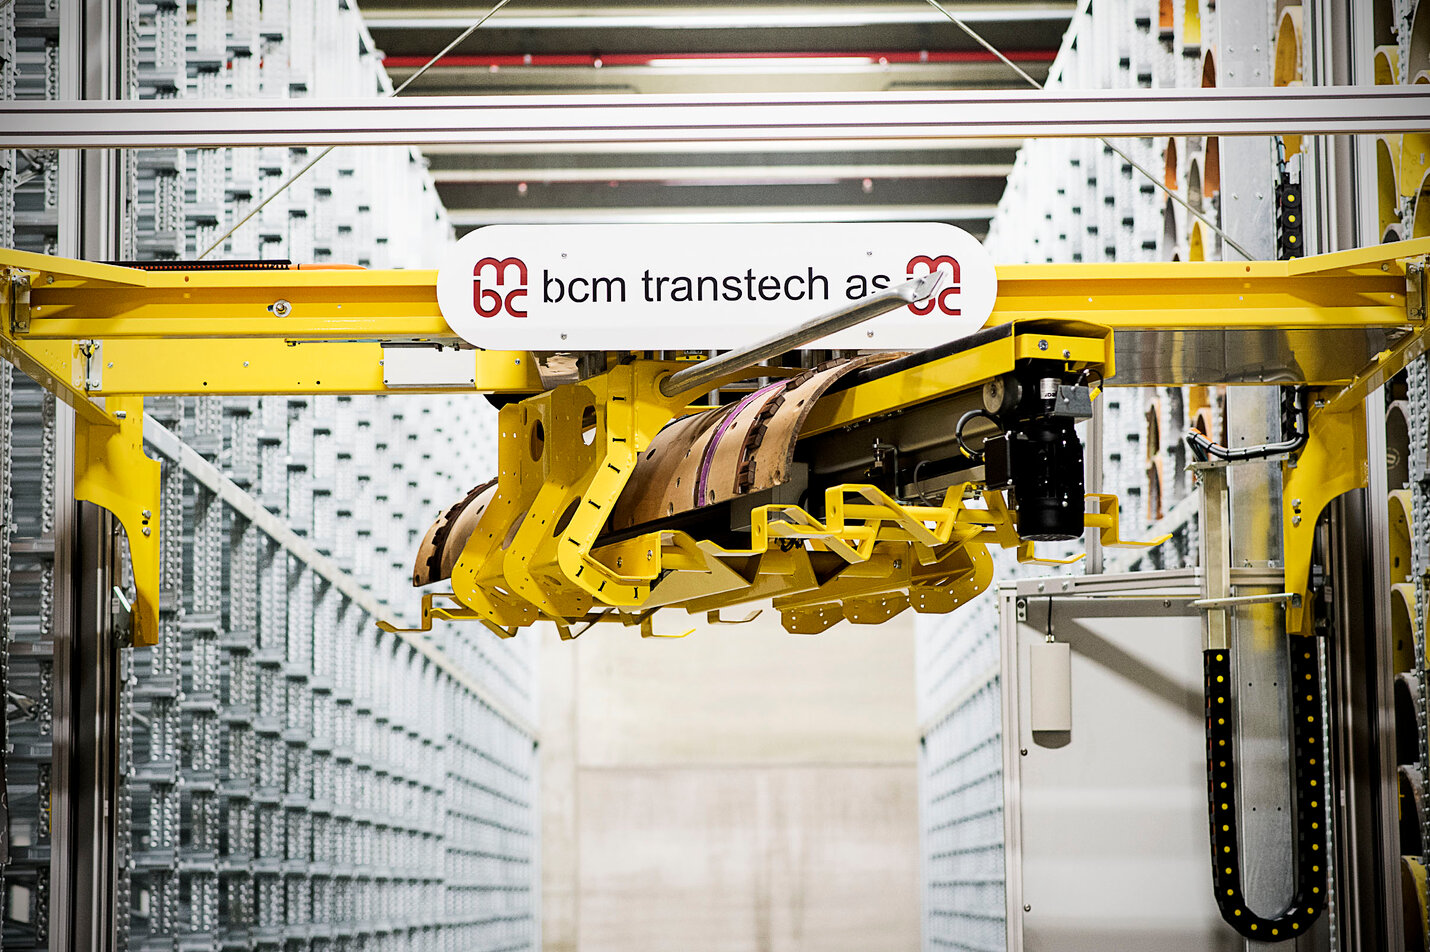 full-automatic rotary die crane in operation 